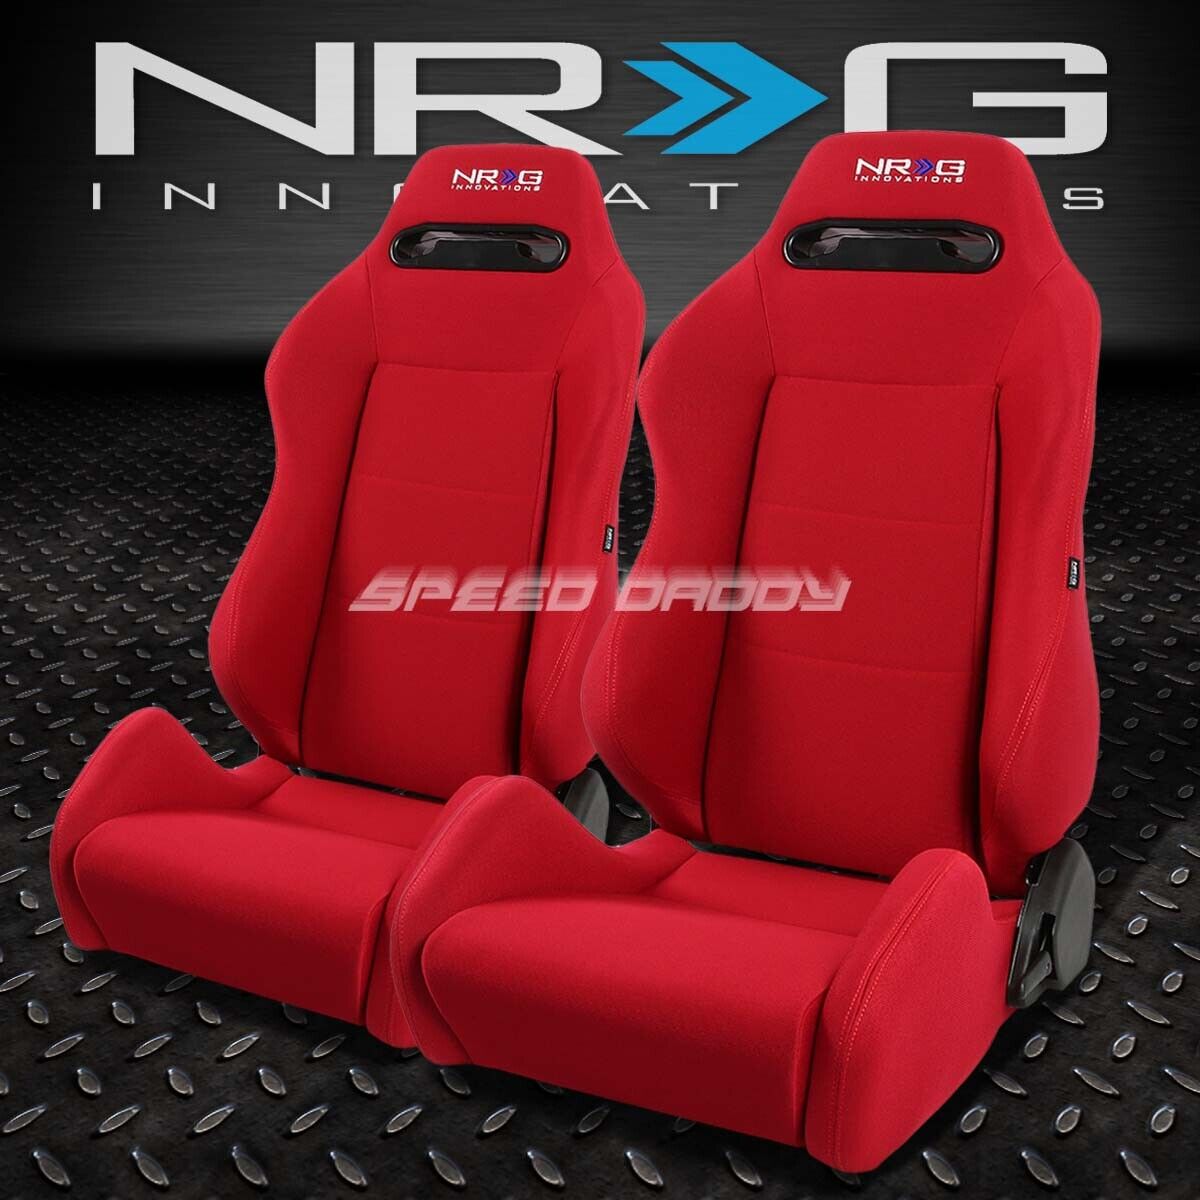 2 X NRG TYPE-R FULLY RECLINABLE RACING SEAT/SEATS+ADJUSTABLE SLIDER RED+STITCHES